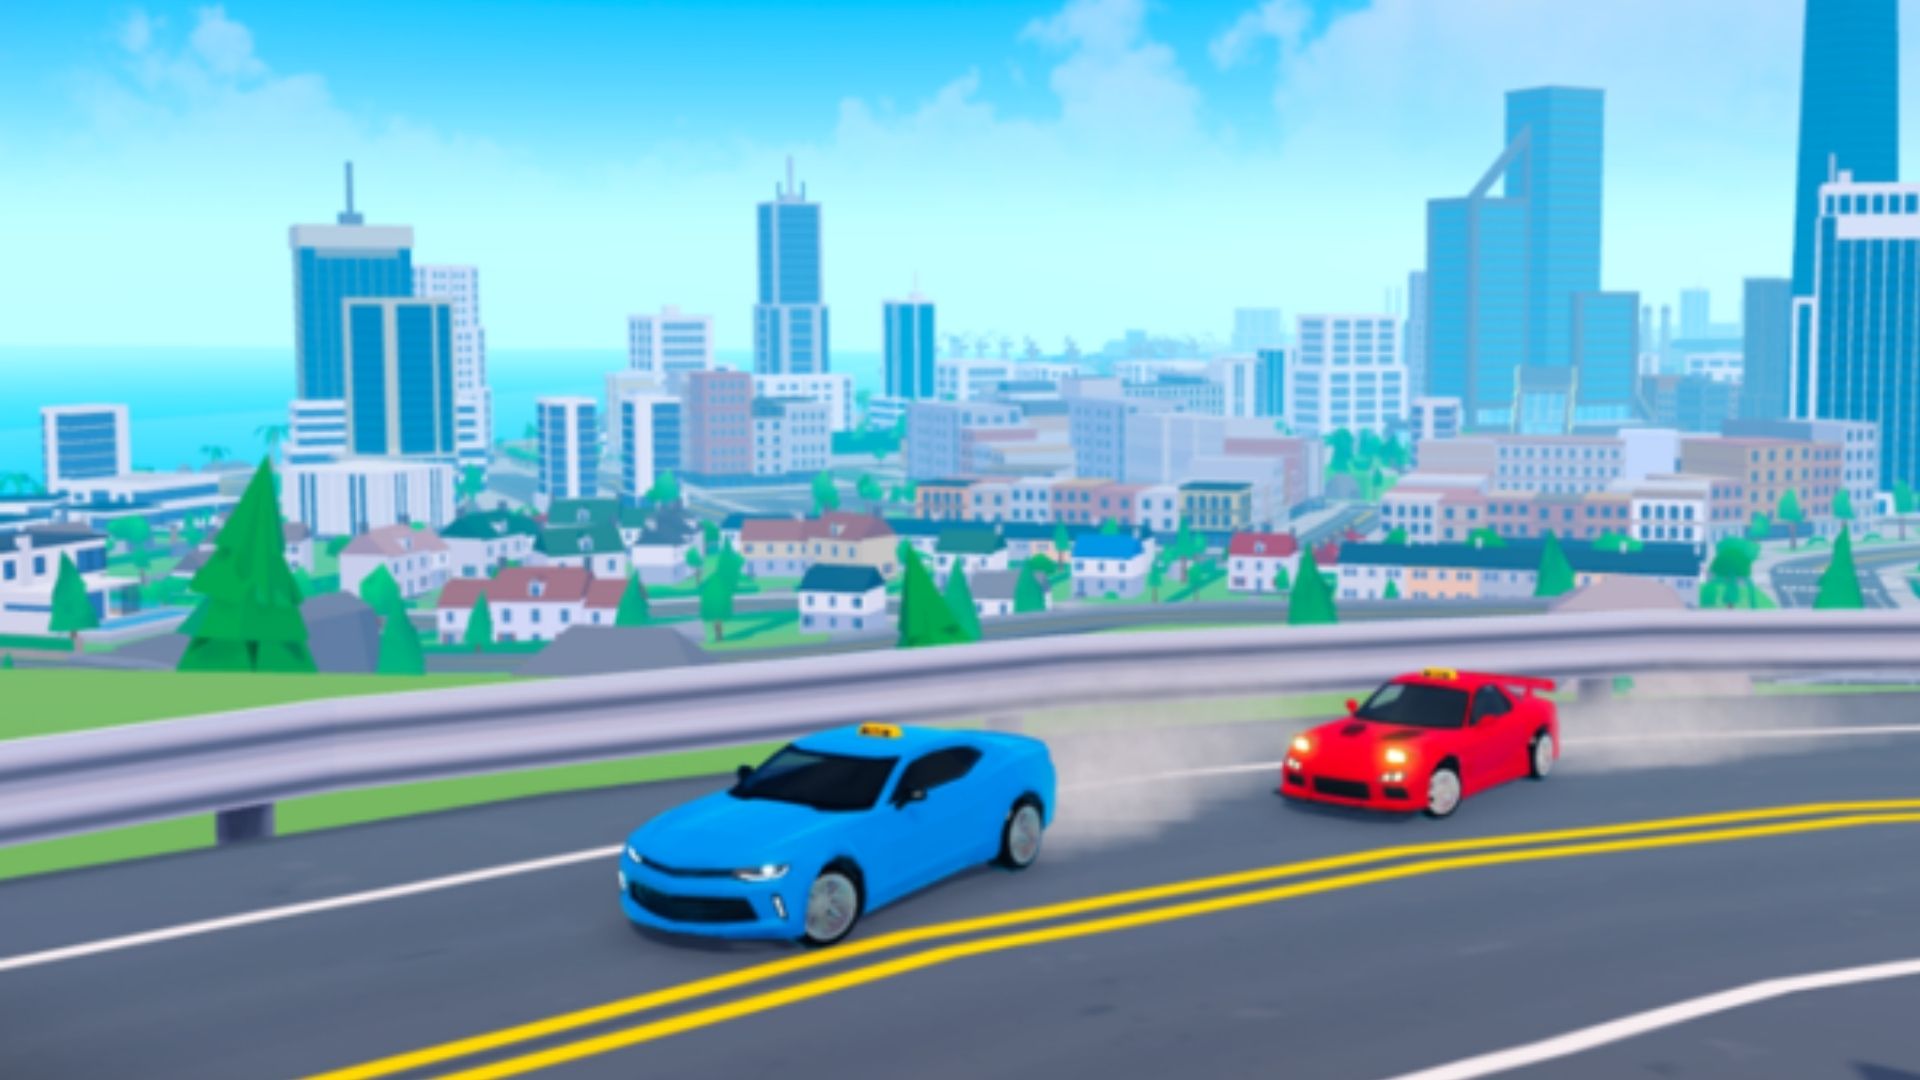 Car Dealership Tycoon codes (October 2023) - Free cash and more